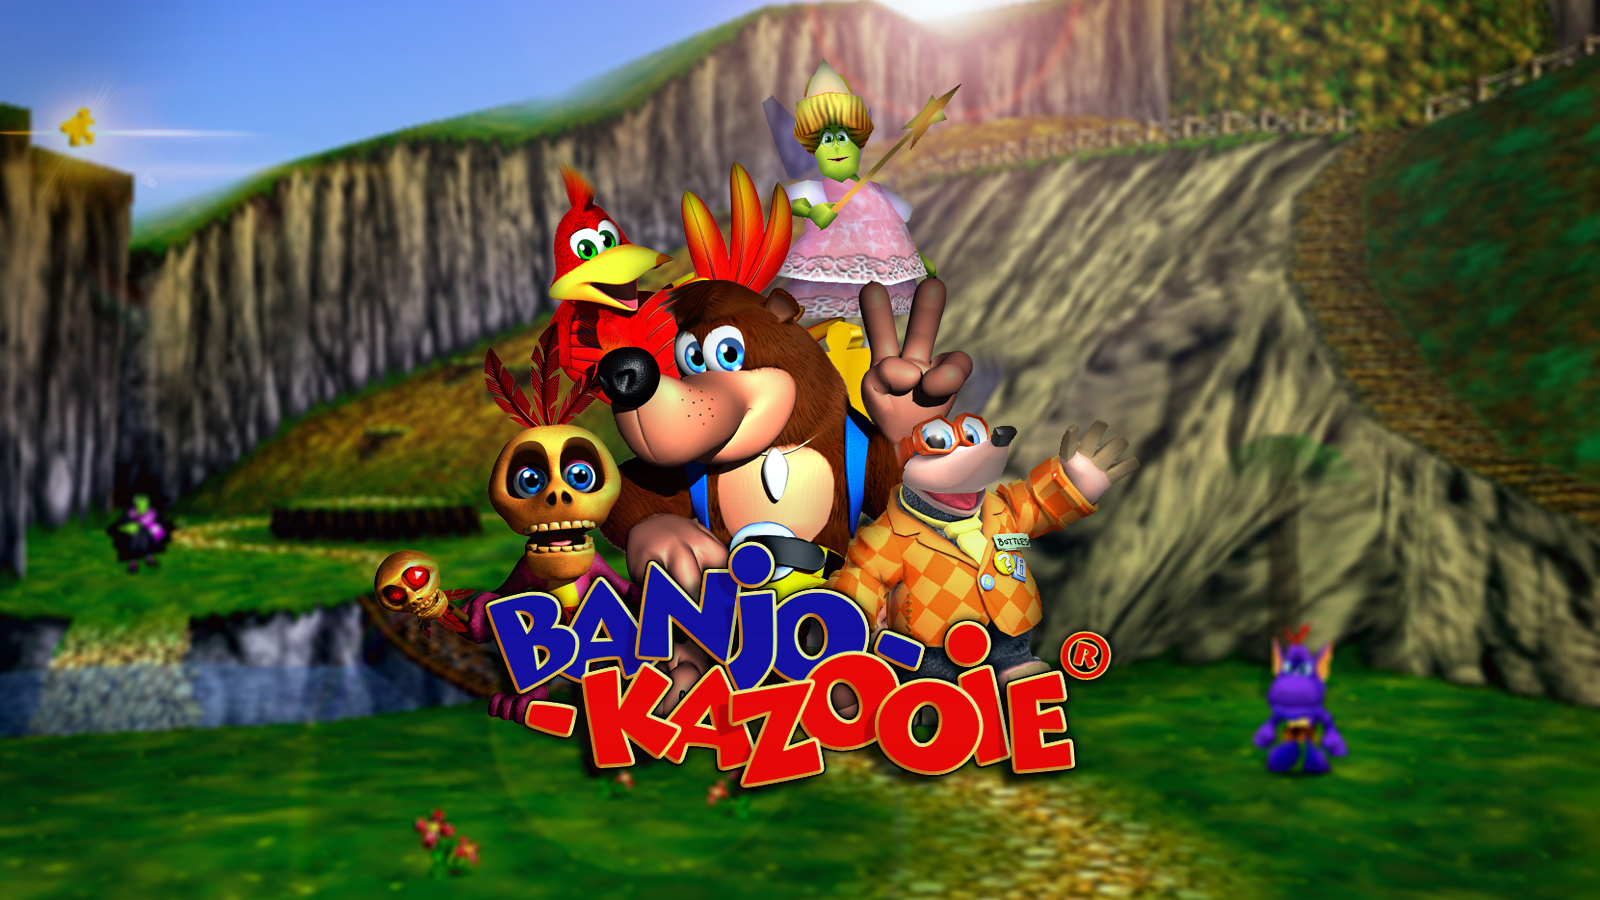 Banjo Kazooie Porn Mod - Banjo Kazooie meets The Legend of Zelda in this free fan game, available  now for download